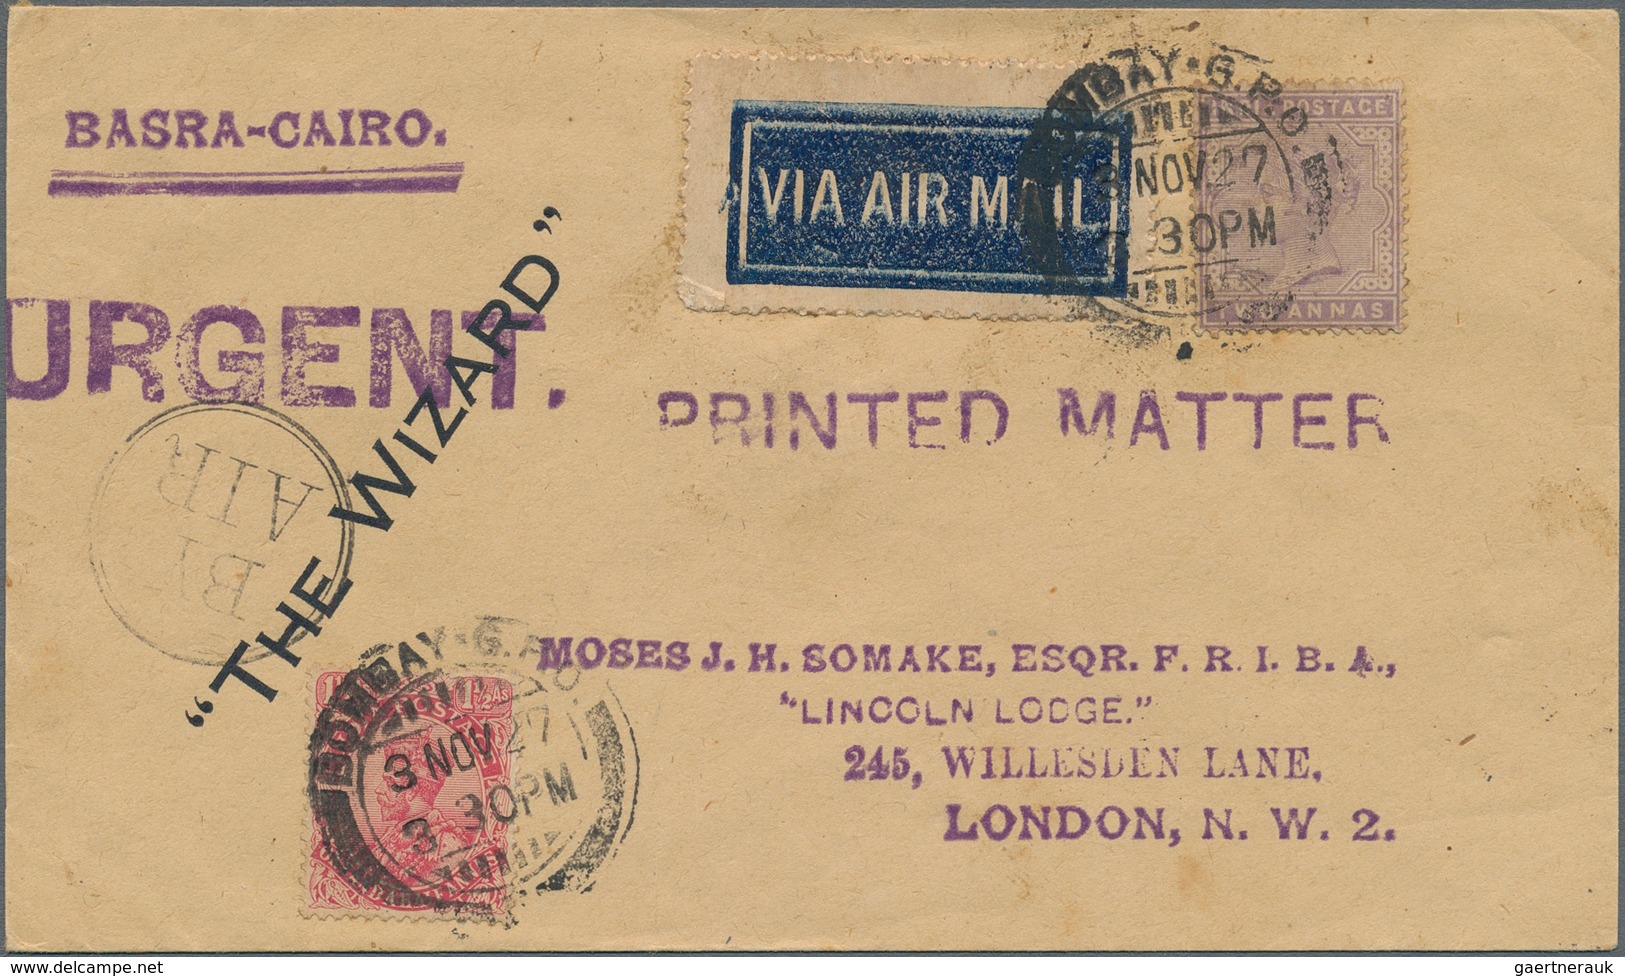 Indien - Flugpost: 1927, Two Early Flight Covers: 1) Printed Matter Flown From BOMBAY "3 11 27" To L - Airmail